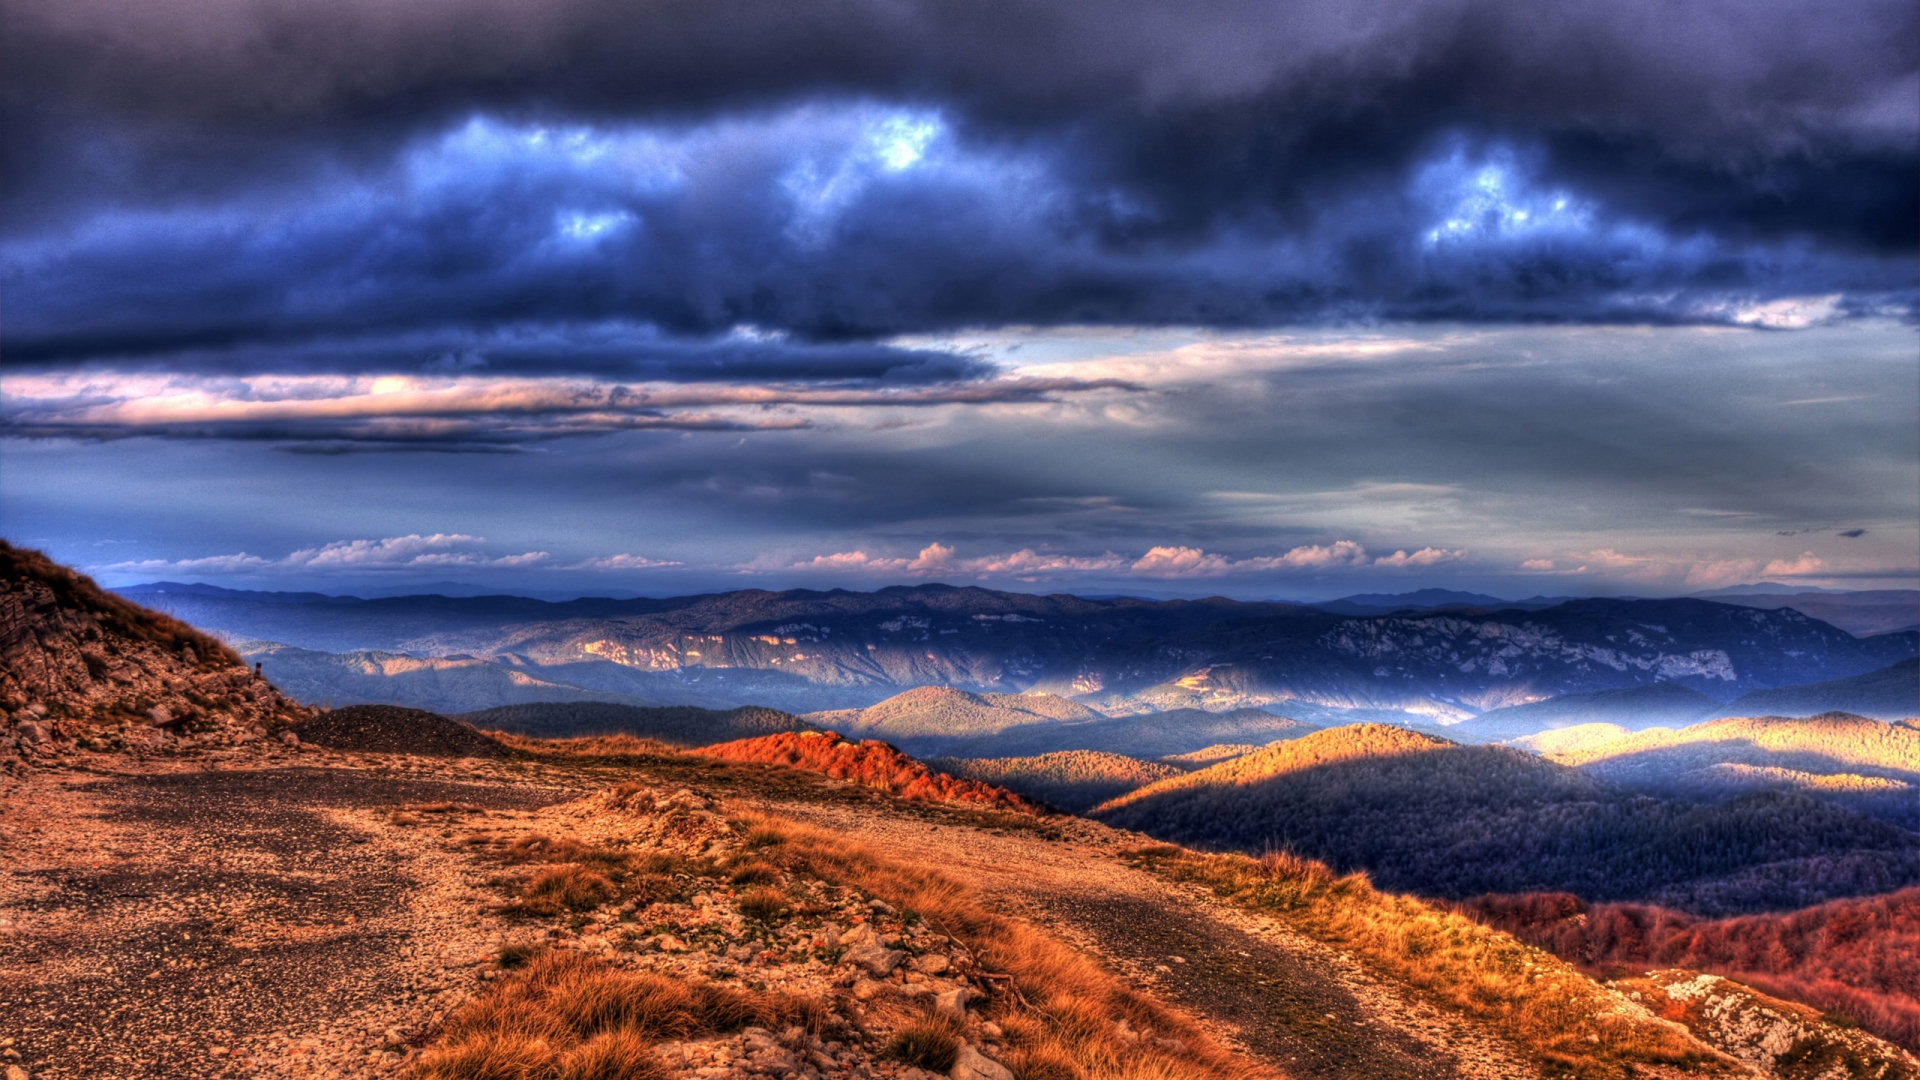 HDR View from Mountains for 1920 x 1080 HDTV 1080p resolution